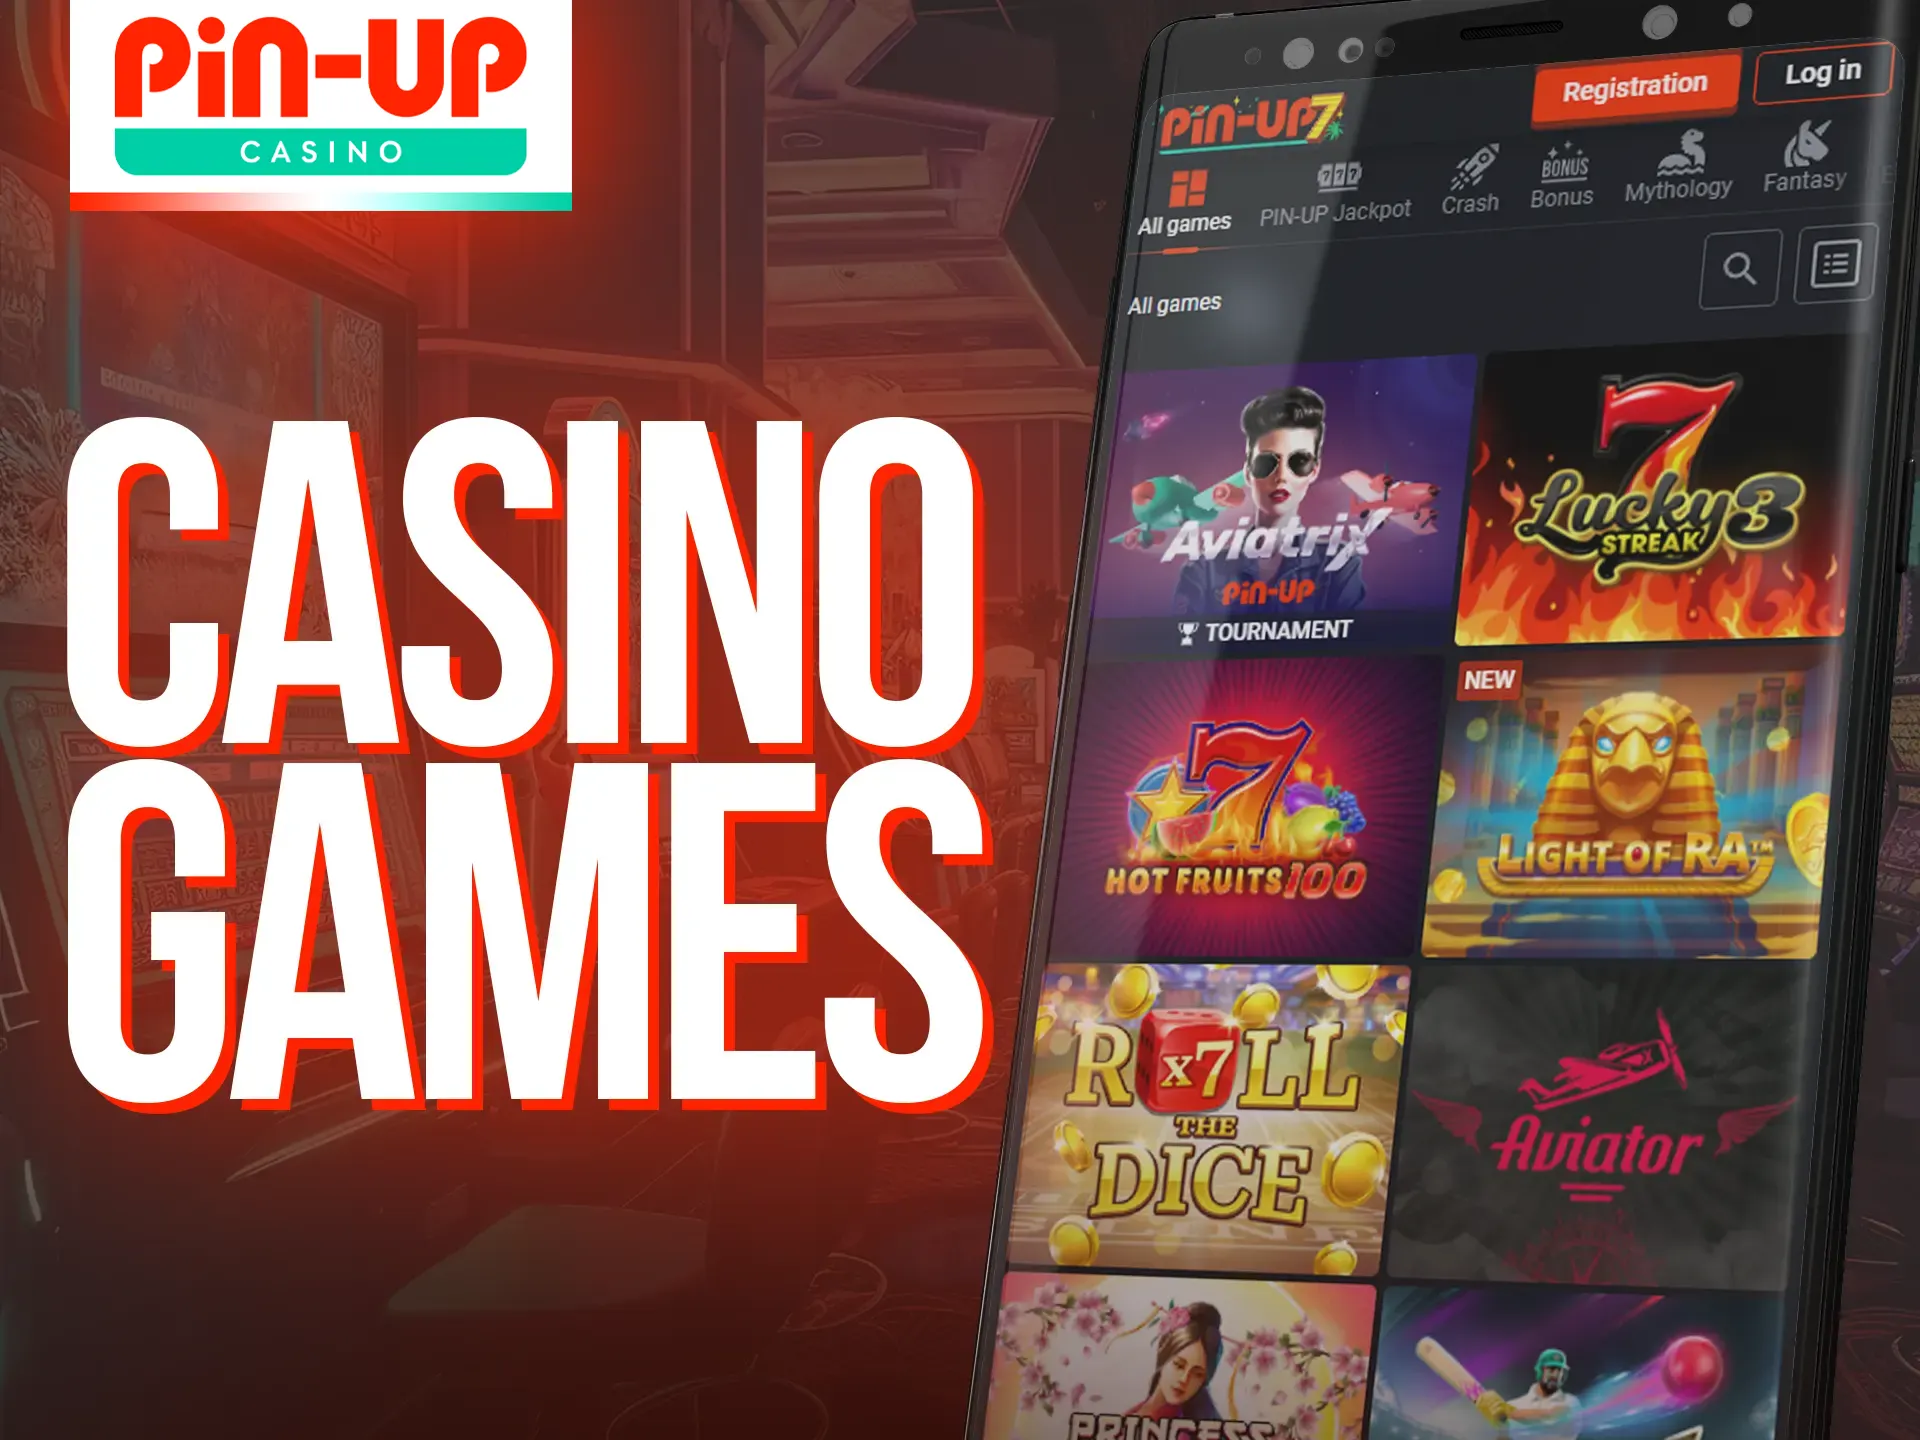 Play your favorite casino games at Pin-Up online casino.